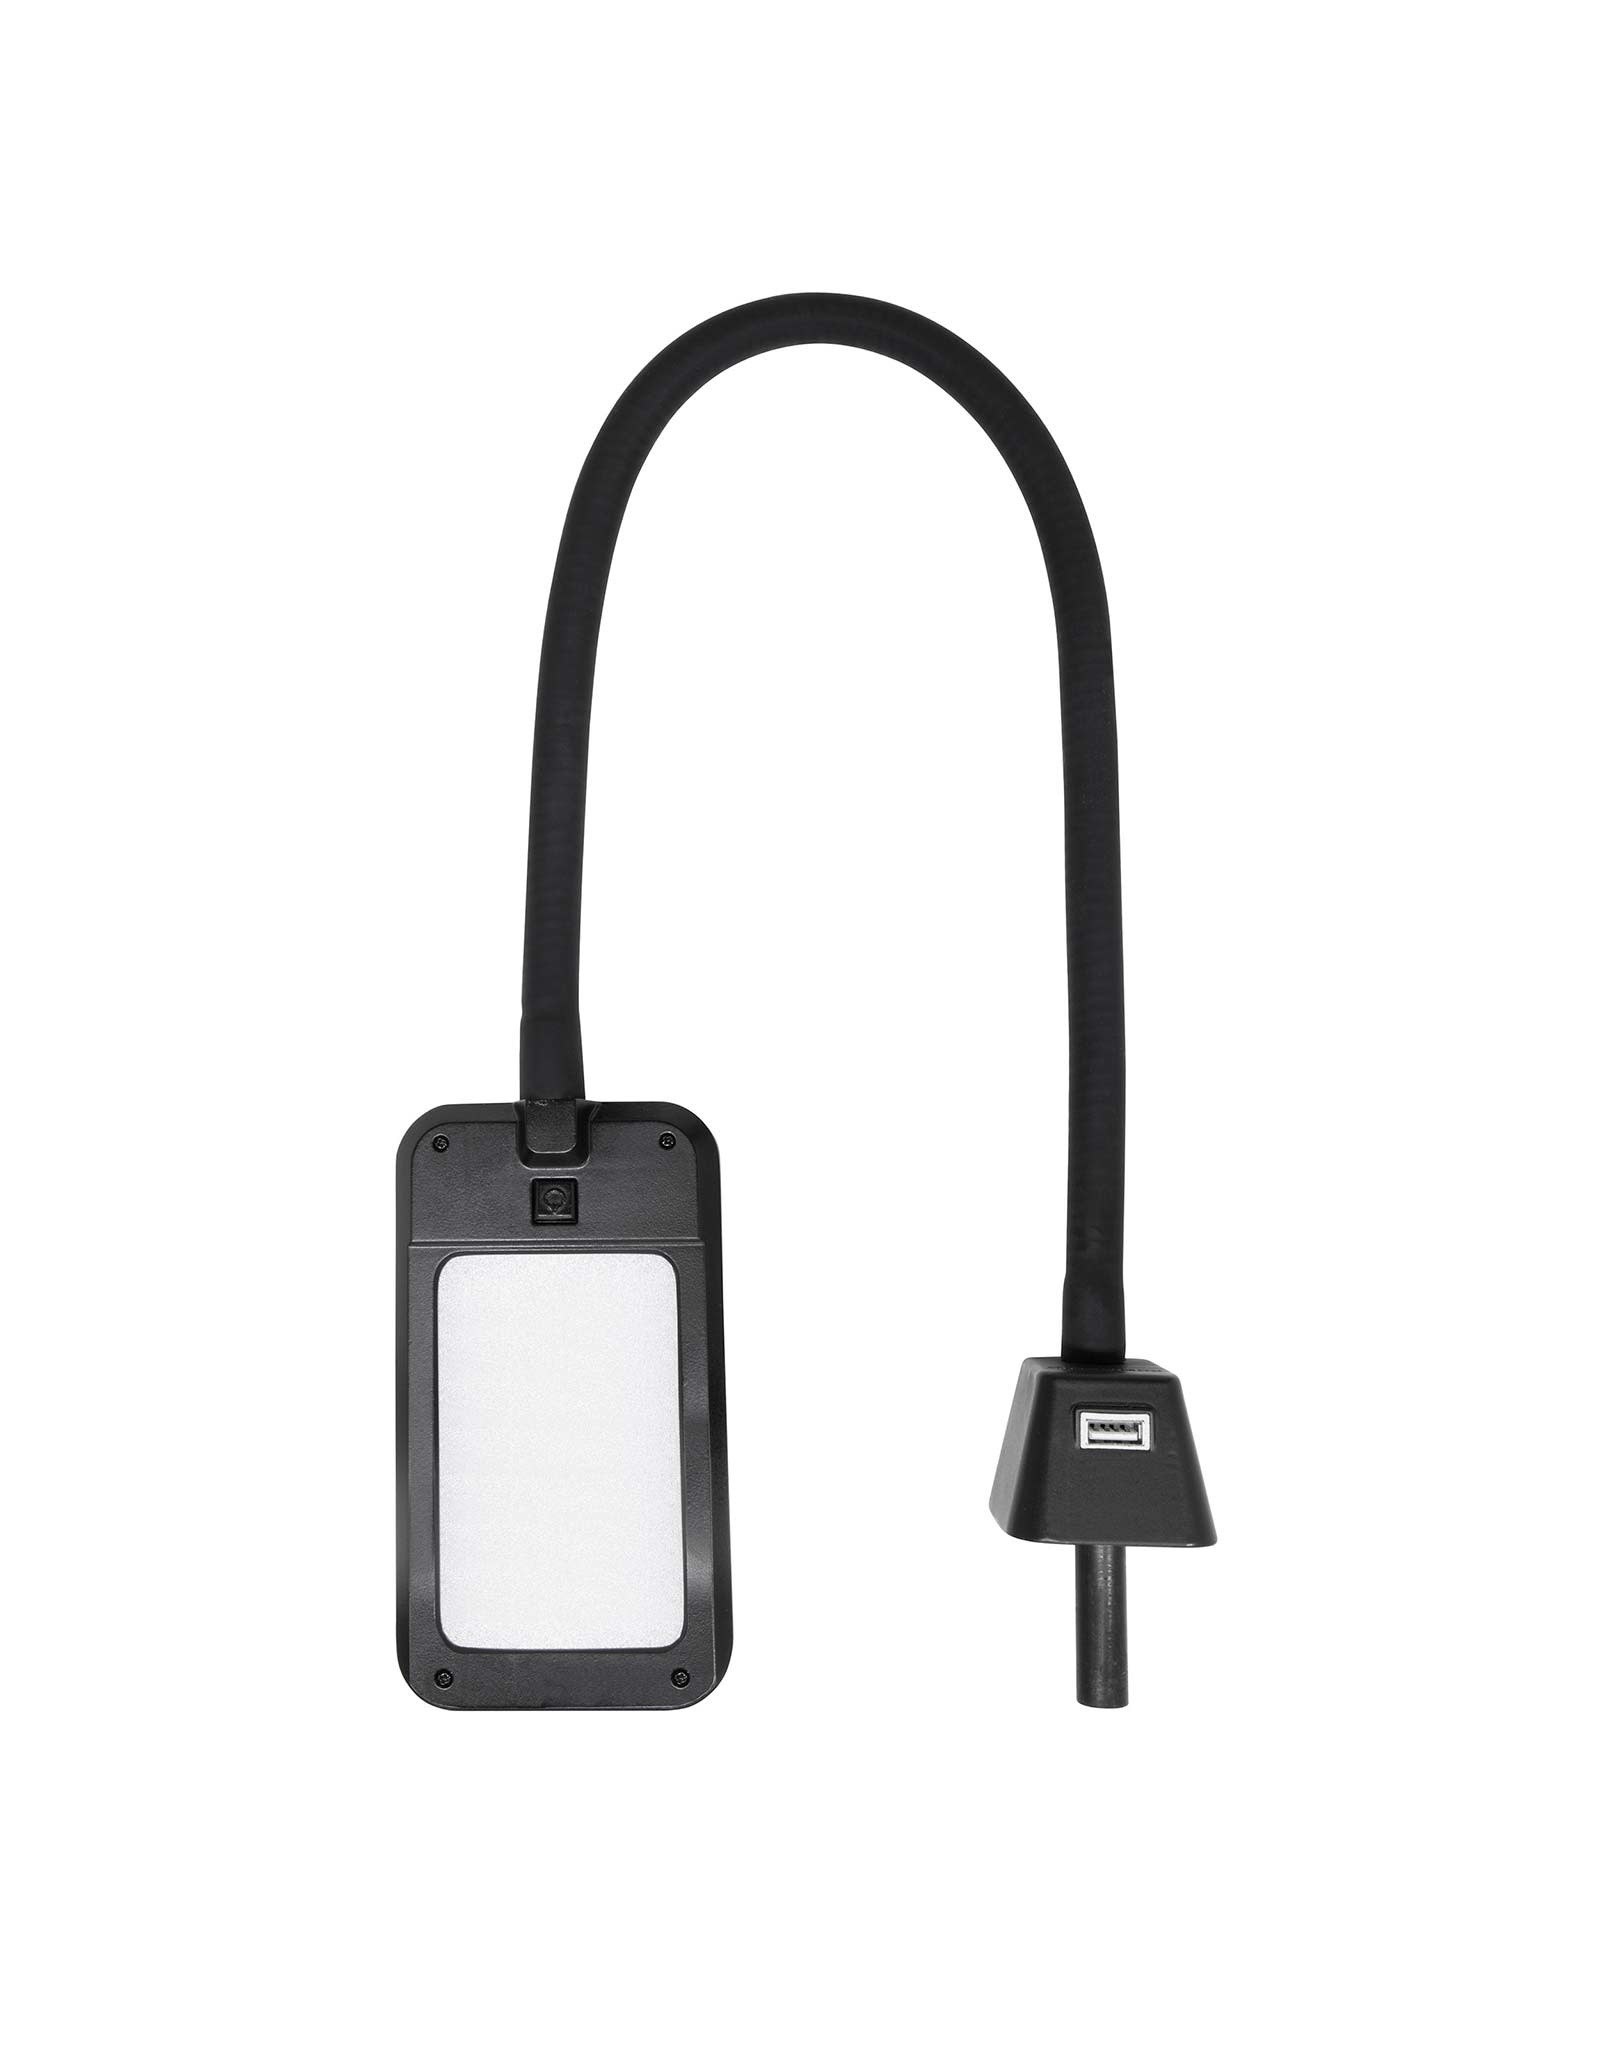 LED Flex Lamp For Office, Art, Sewing, Or Crafts With USB Charging Base In Black